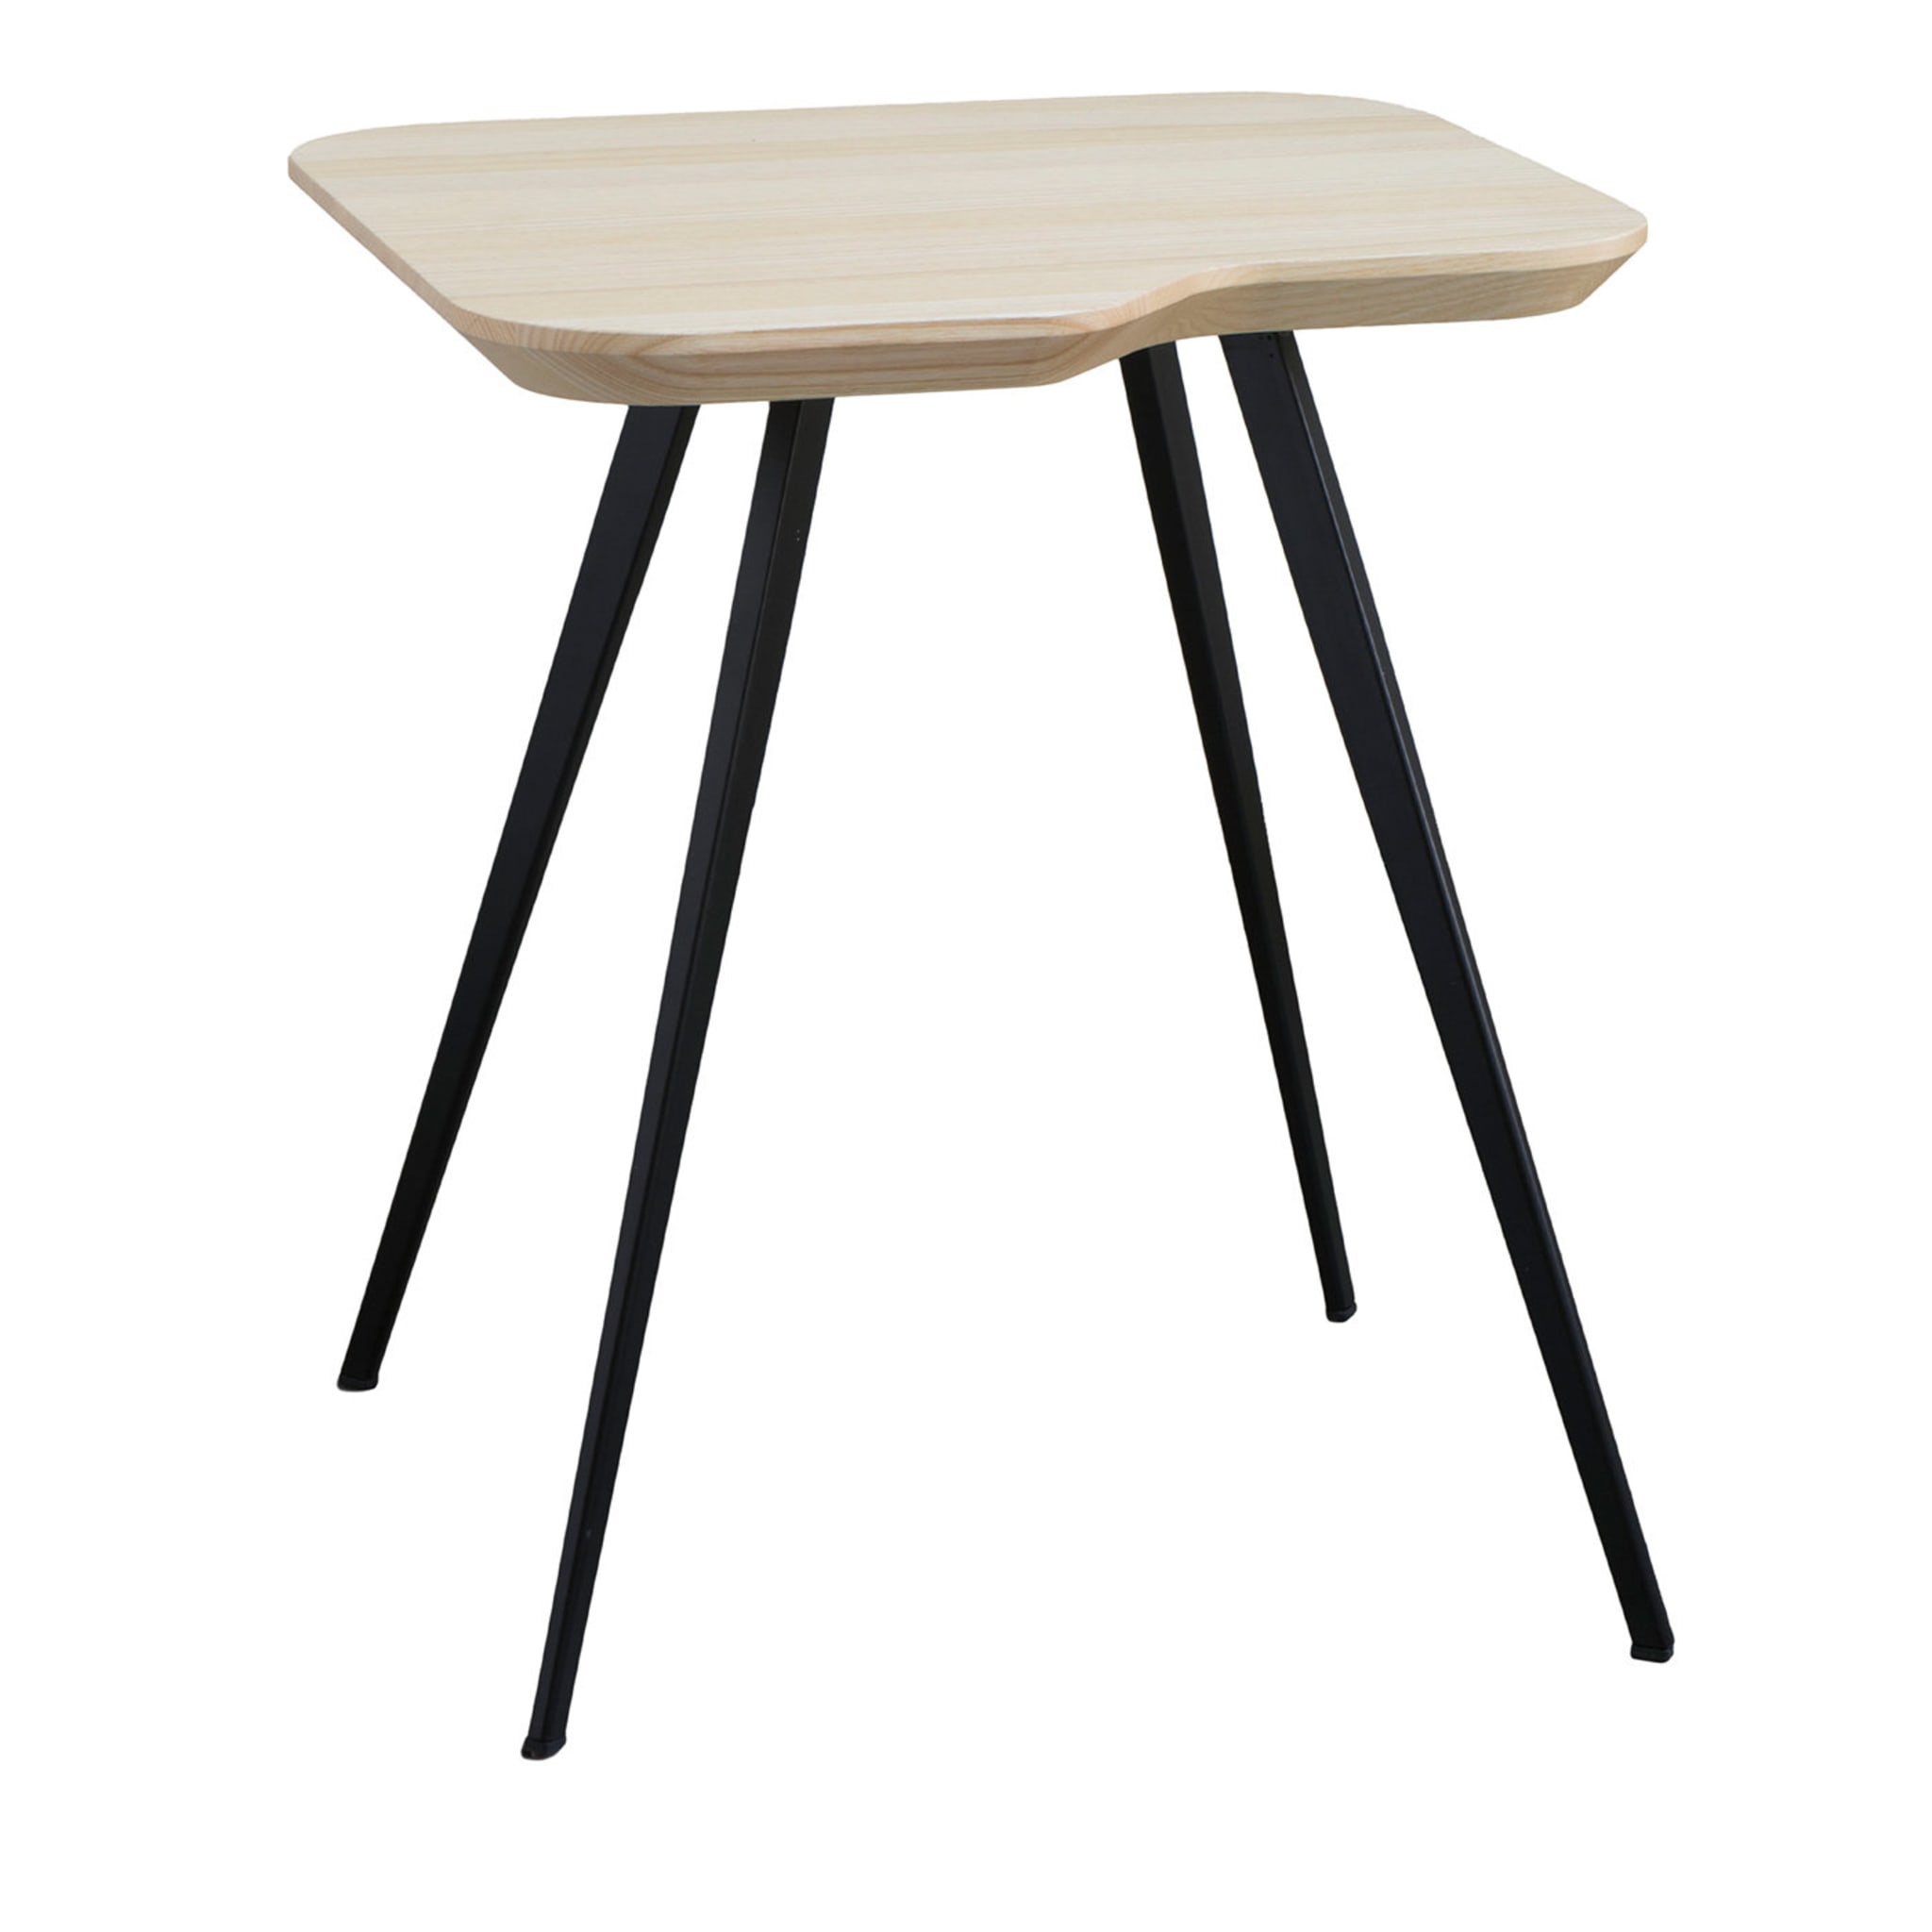 Aky Small Met Tall White Side Table by Emilio Nanni - Main view